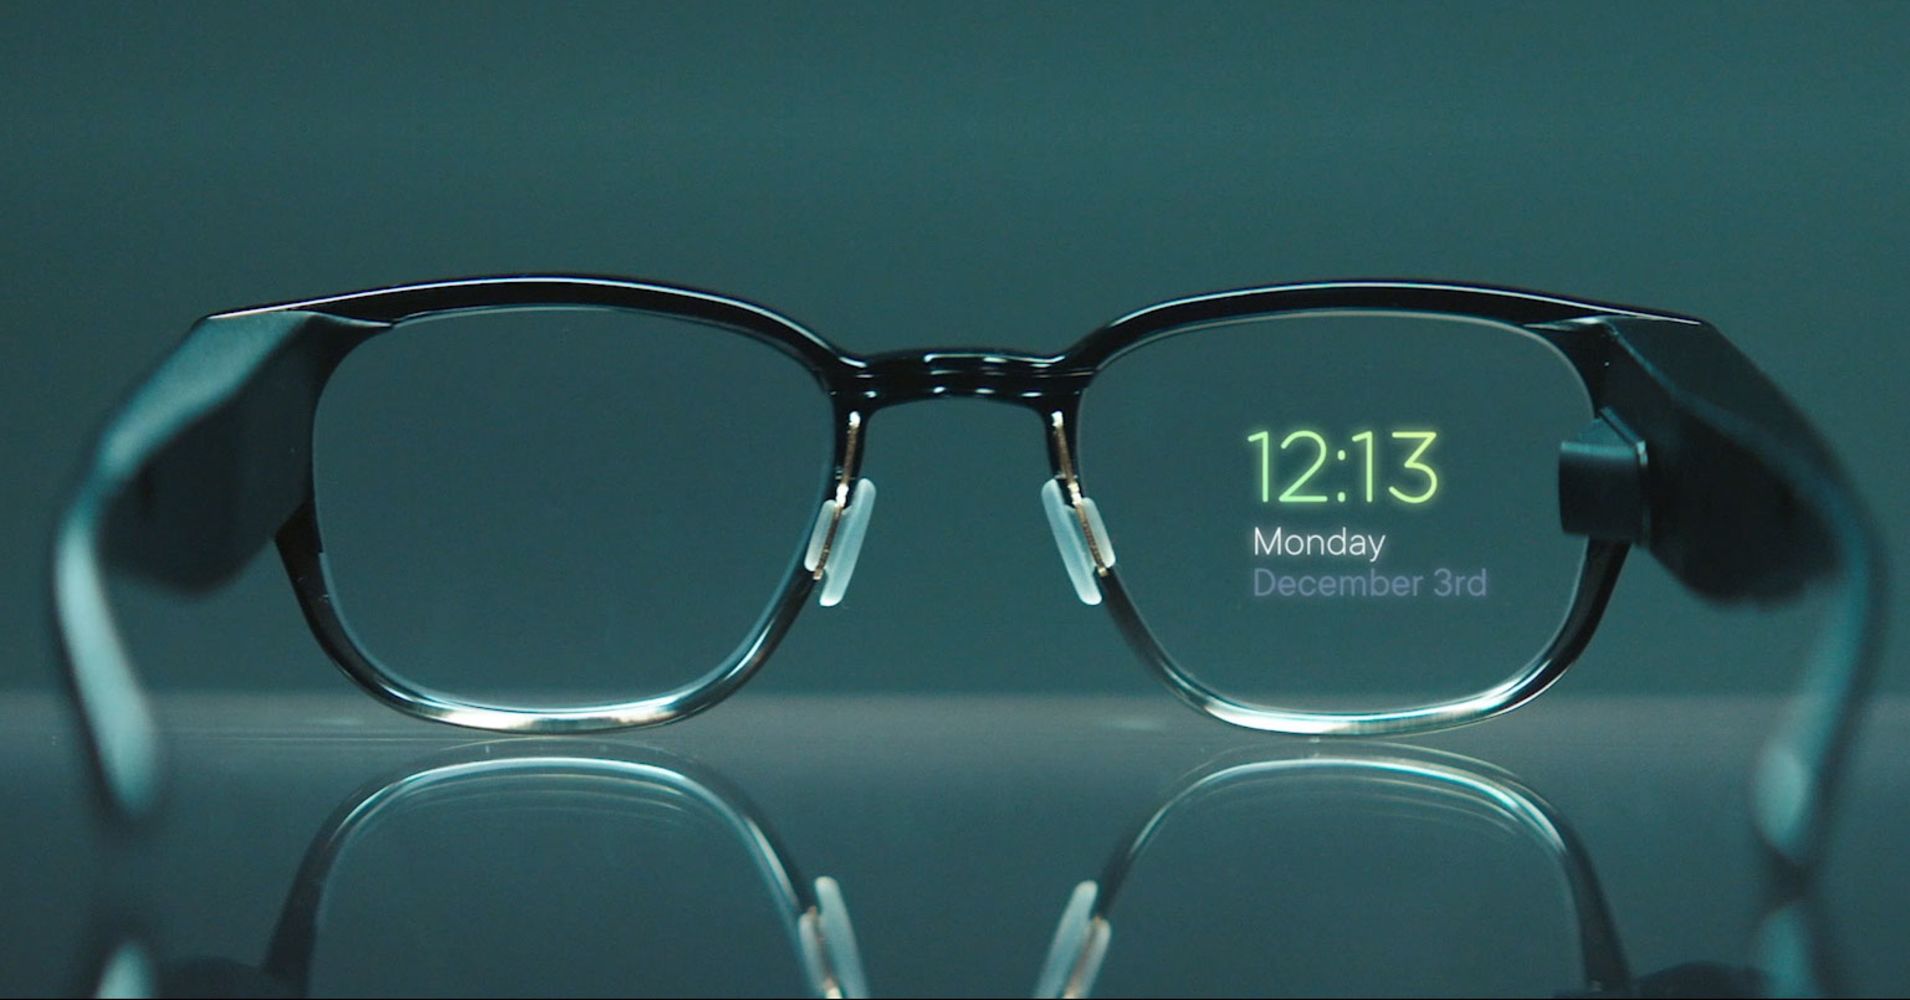 North introduced smart glasses with a built-in projector